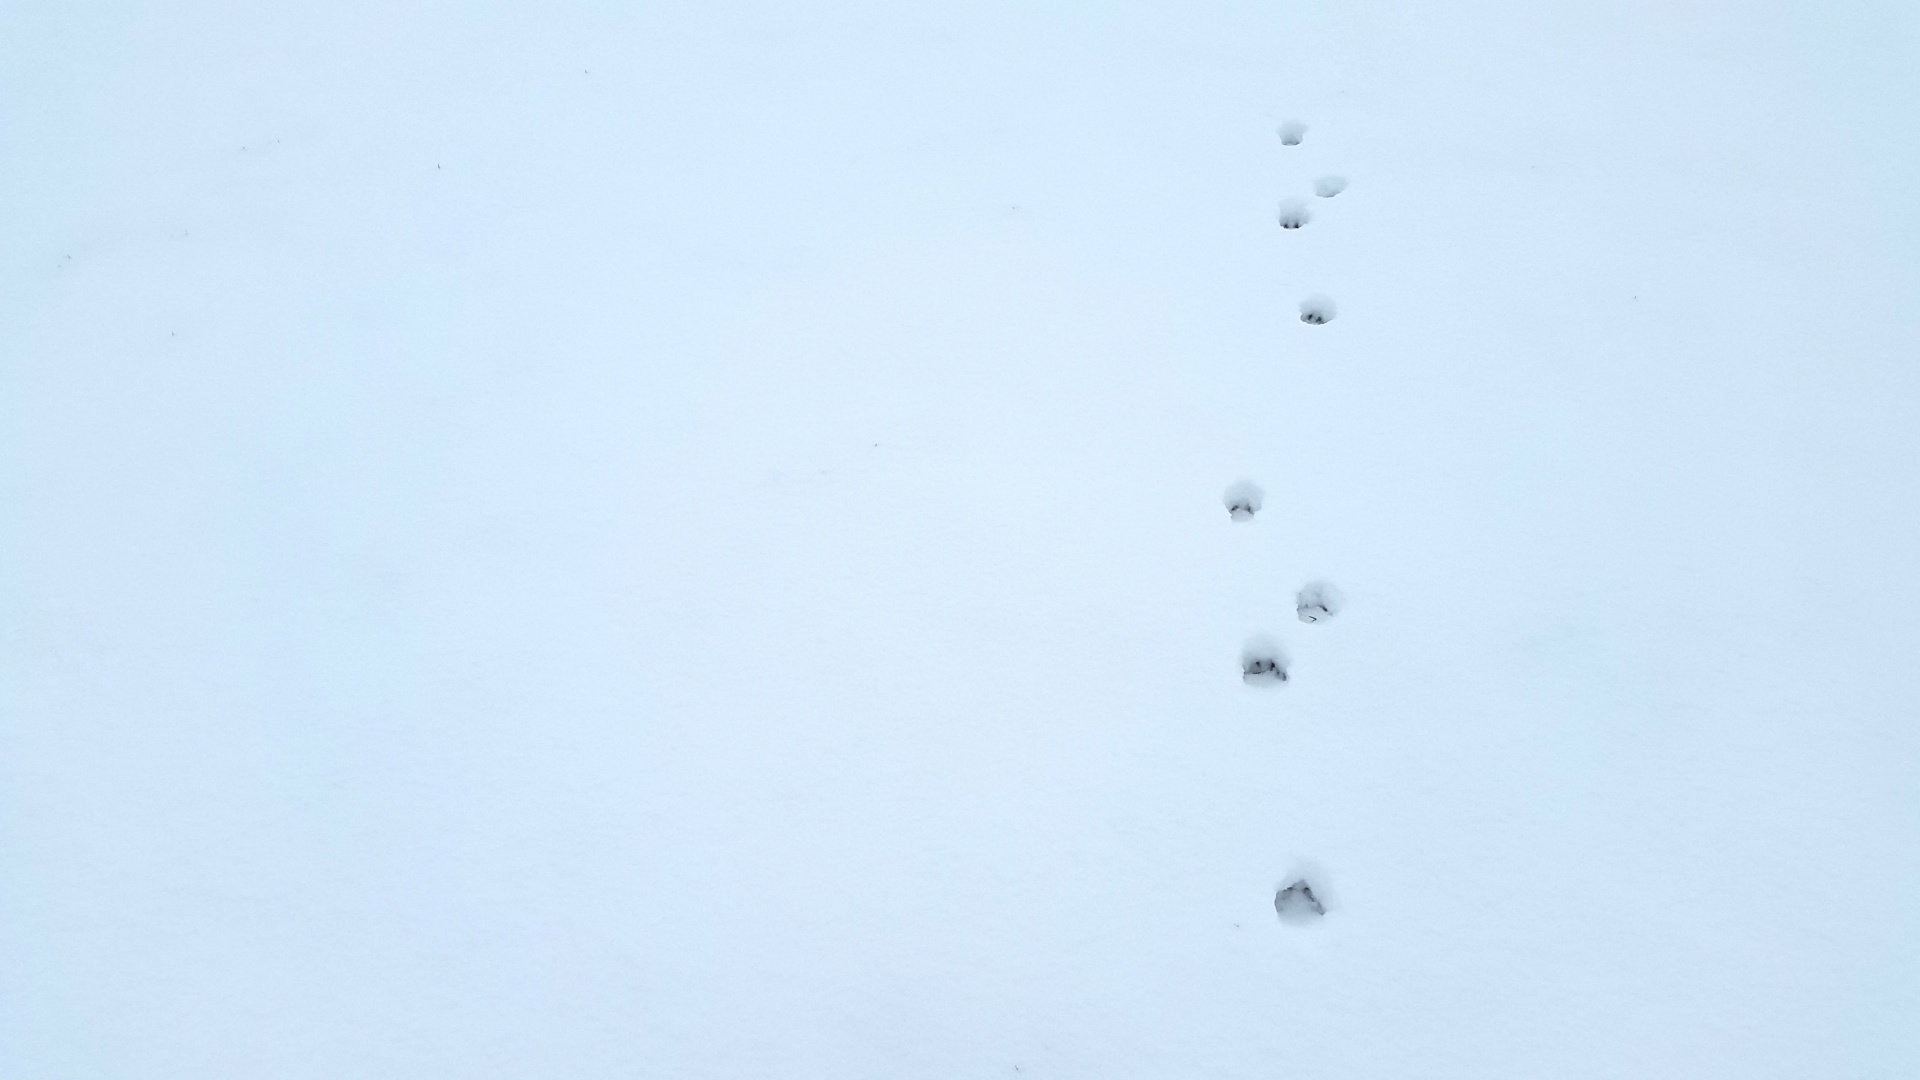 Paw Prints In Snow.